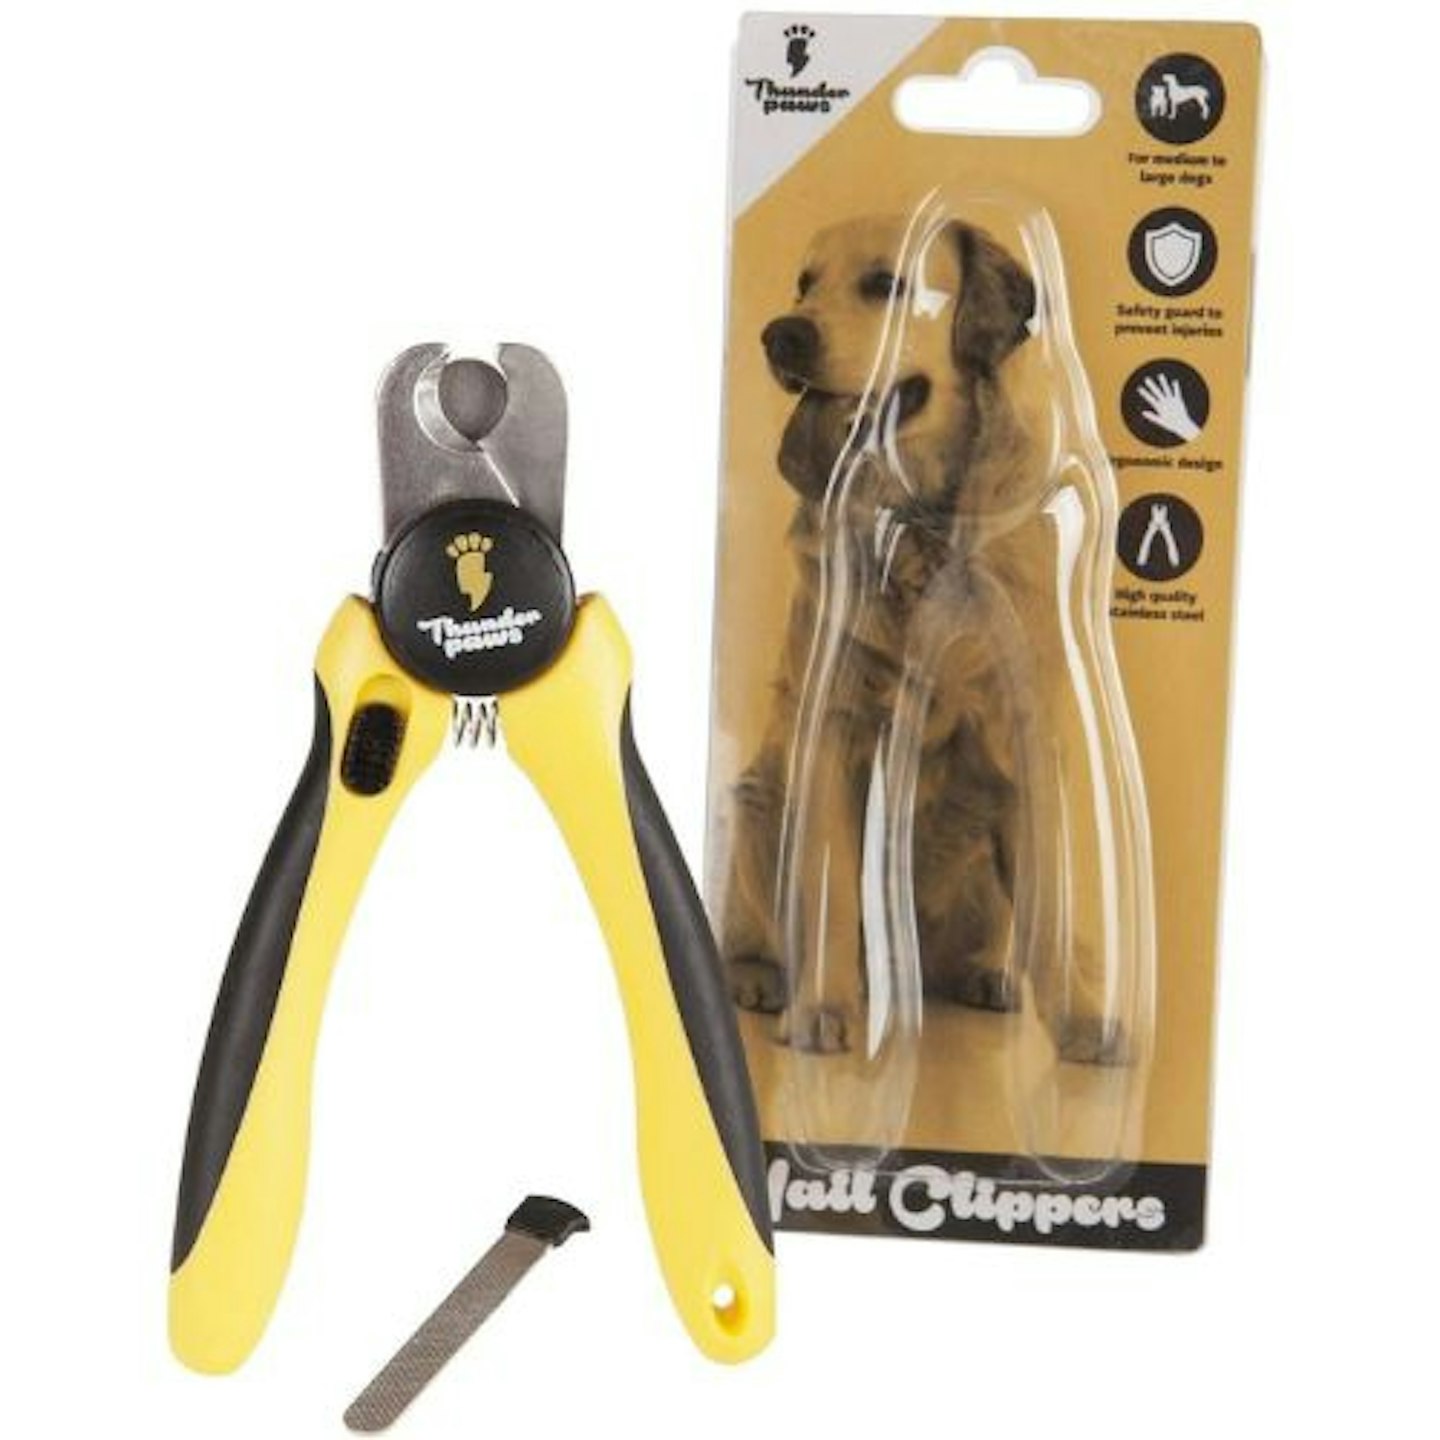 Thunderpaws Professional-Grade Dog Nail Clippers